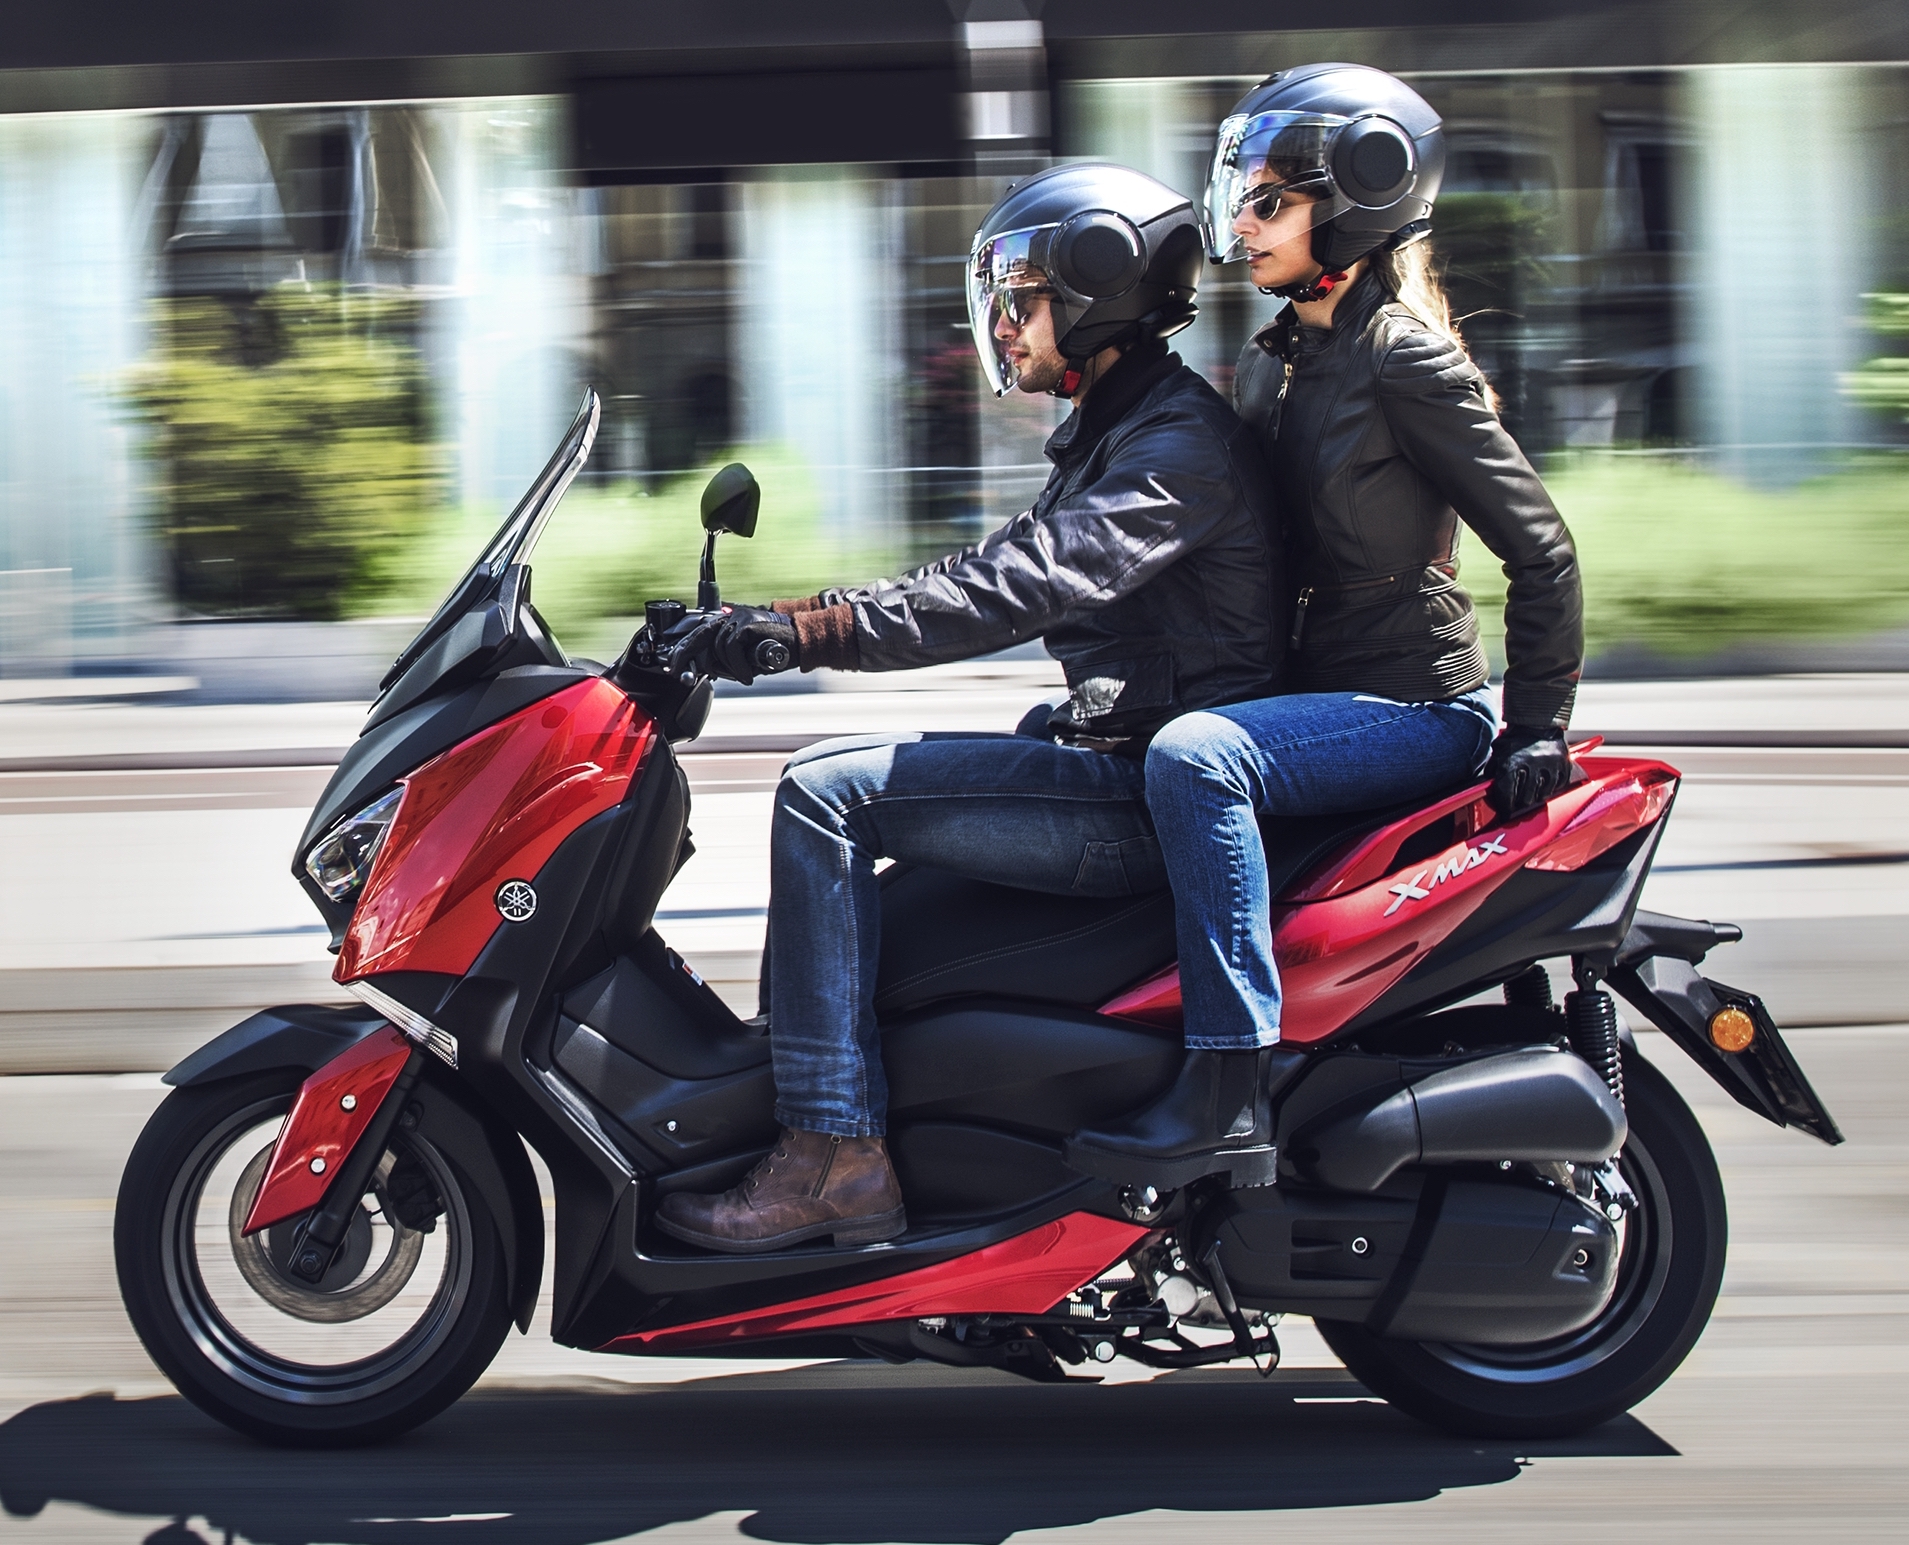 2018 Yamaha X-Max 125 scooter released in Europe Image 709943